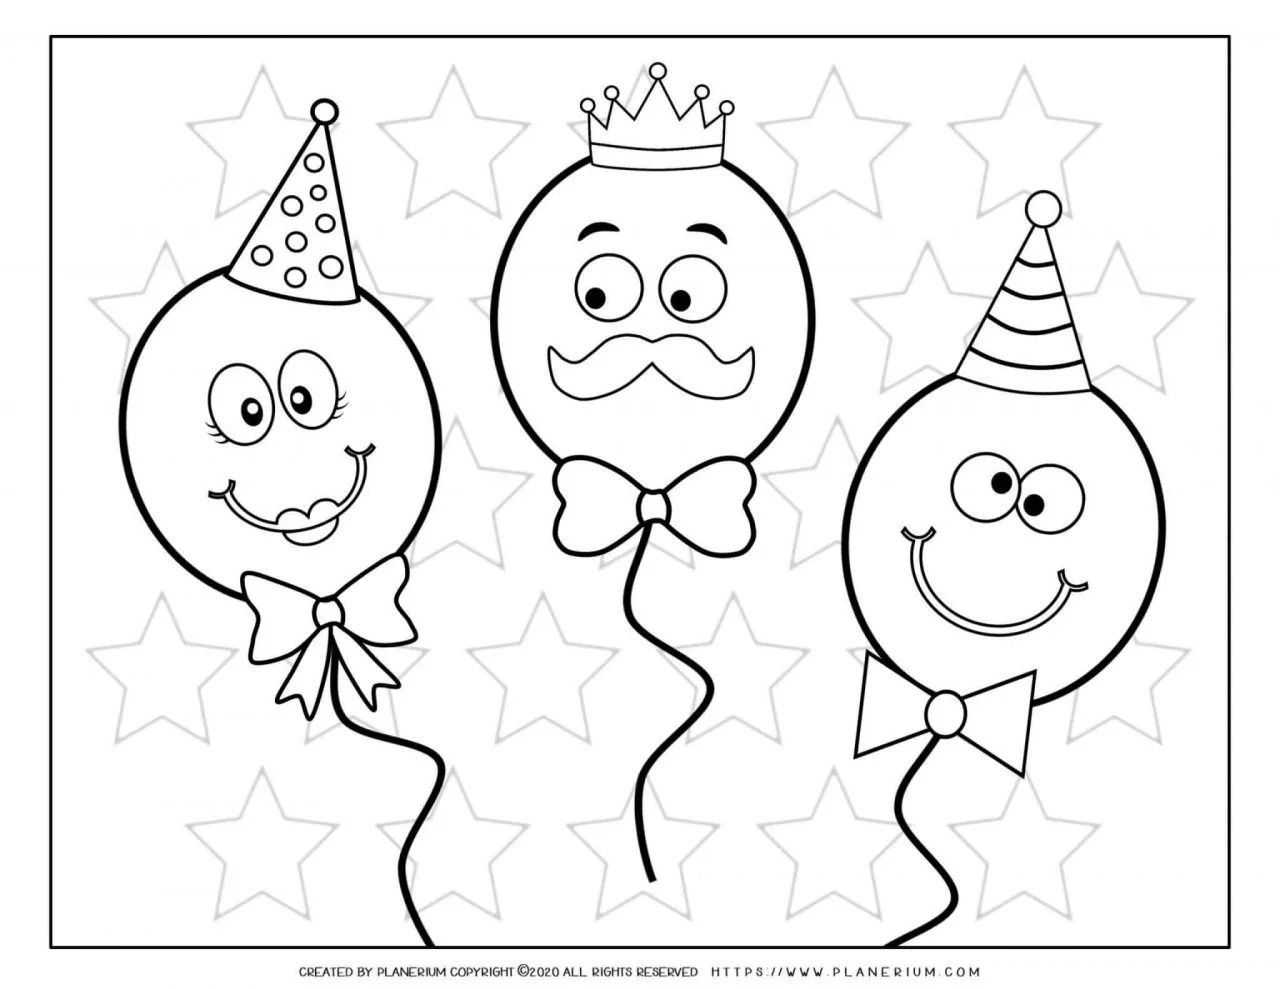 Carnival - Coloring Page Worksheet - Balloons Faces | Planerium